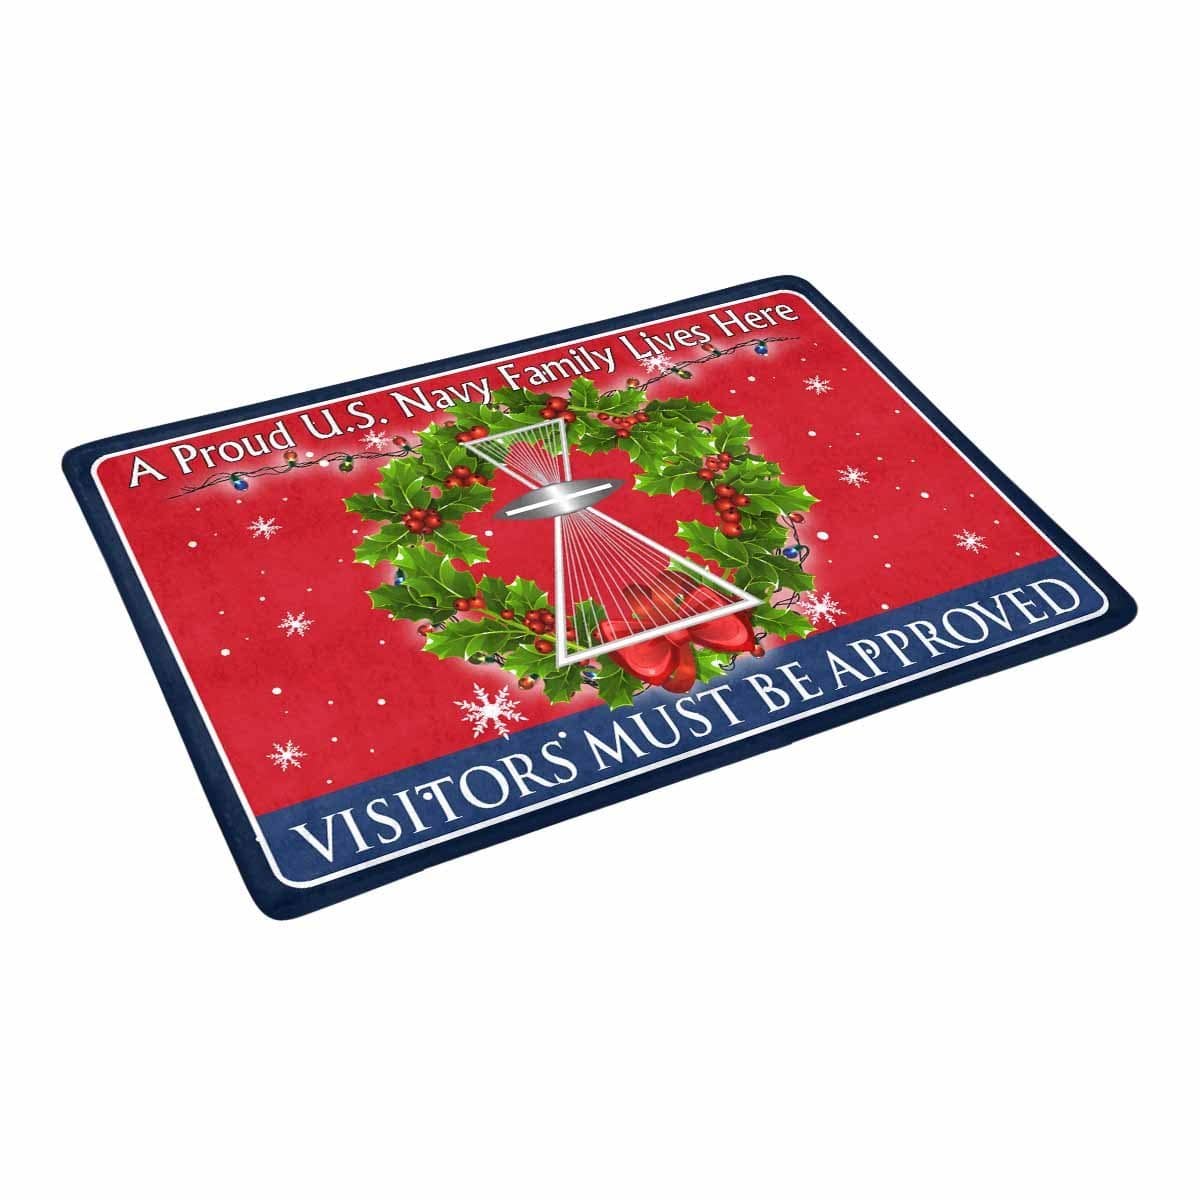 U.S Navy Aviation Photographer's Mate PH - Visitors must be approved - Christmas Doormat-Doormat-Navy-Rate-Veterans Nation